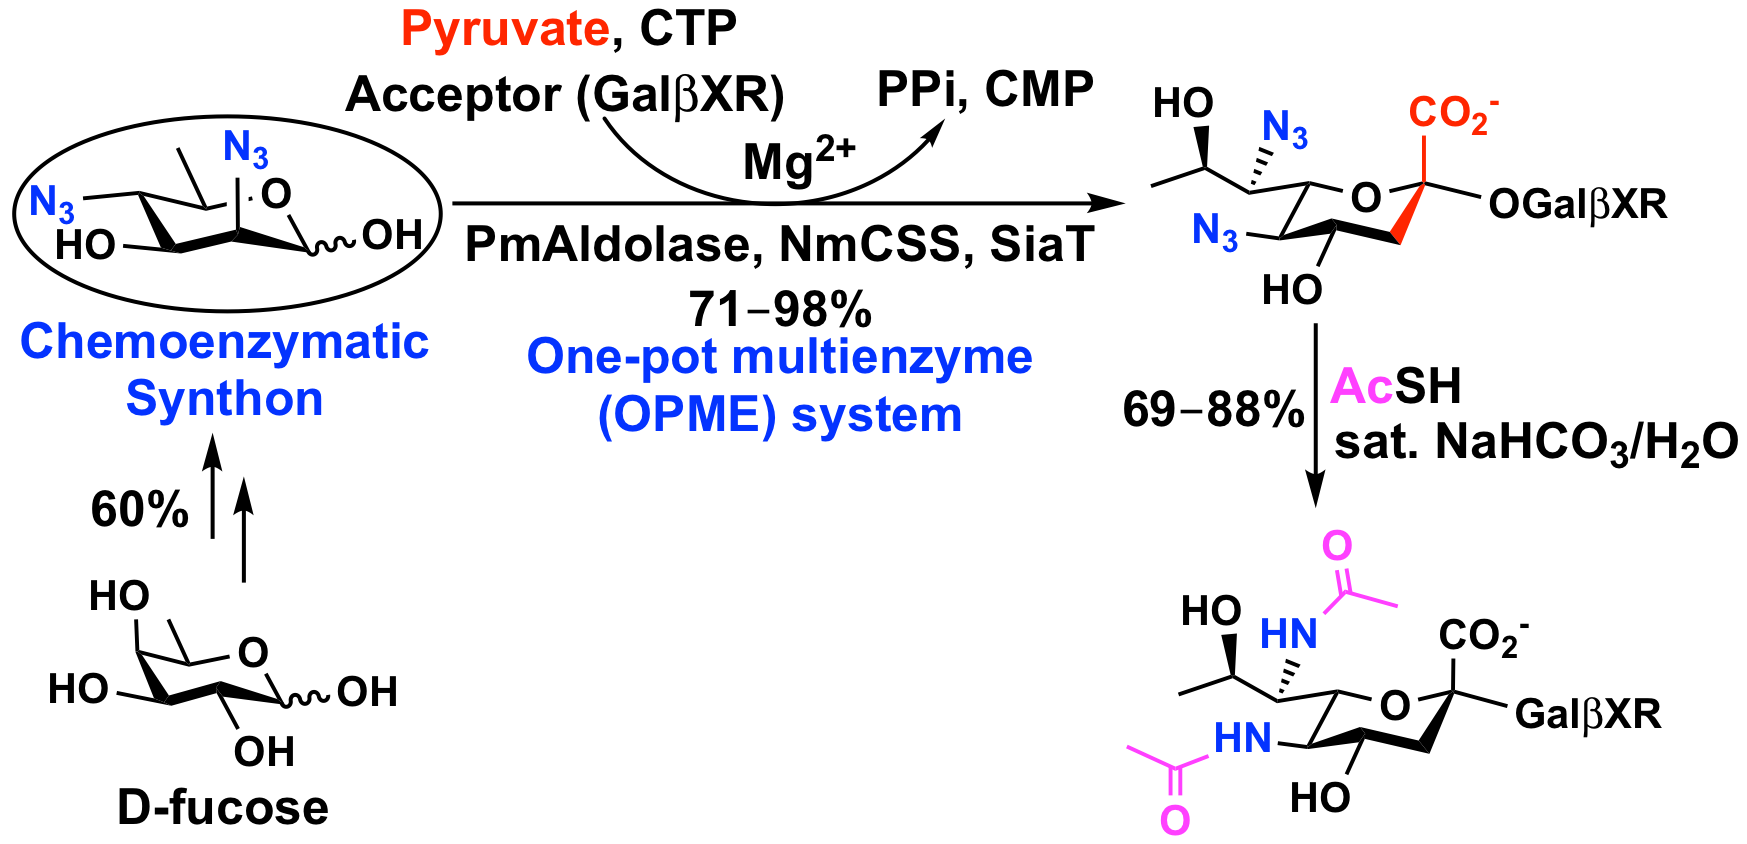 The top left shows a chemoenzymatic synthon easily accessible by chemical synthesis; it can be readily converted into complex carbohydrate analogs (bottom right) using the multi-enzyme synthetic method.